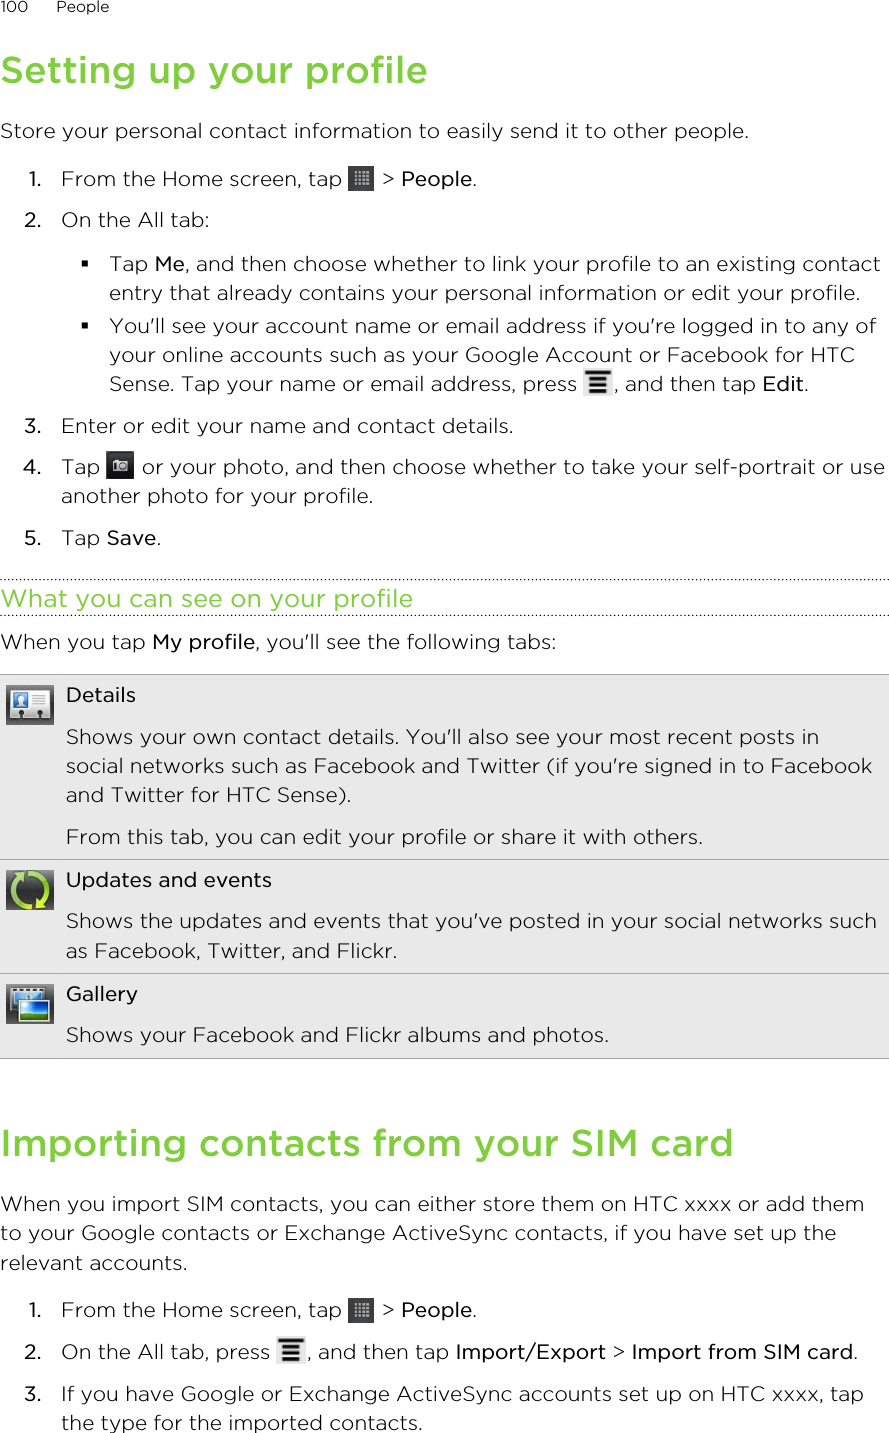 Setting up your profileStore your personal contact information to easily send it to other people.1. From the Home screen, tap   &gt; People.2. On the All tab:§Tap Me, and then choose whether to link your profile to an existing contactentry that already contains your personal information or edit your profile.§You&apos;ll see your account name or email address if you&apos;re logged in to any ofyour online accounts such as your Google Account or Facebook for HTCSense. Tap your name or email address, press  , and then tap Edit.3. Enter or edit your name and contact details.4. Tap   or your photo, and then choose whether to take your self-portrait or useanother photo for your profile.5. Tap Save.What you can see on your profileWhen you tap My profile, you&apos;ll see the following tabs:DetailsShows your own contact details. You&apos;ll also see your most recent posts insocial networks such as Facebook and Twitter (if you&apos;re signed in to Facebookand Twitter for HTC Sense).From this tab, you can edit your profile or share it with others.Updates and eventsShows the updates and events that you&apos;ve posted in your social networks suchas Facebook, Twitter, and Flickr.GalleryShows your Facebook and Flickr albums and photos.Importing contacts from your SIM cardWhen you import SIM contacts, you can either store them on HTC xxxx or add themto your Google contacts or Exchange ActiveSync contacts, if you have set up therelevant accounts.1. From the Home screen, tap   &gt; People.2. On the All tab, press  , and then tap Import/Export &gt; Import from SIM card.3. If you have Google or Exchange ActiveSync accounts set up on HTC xxxx, tapthe type for the imported contacts.100 People